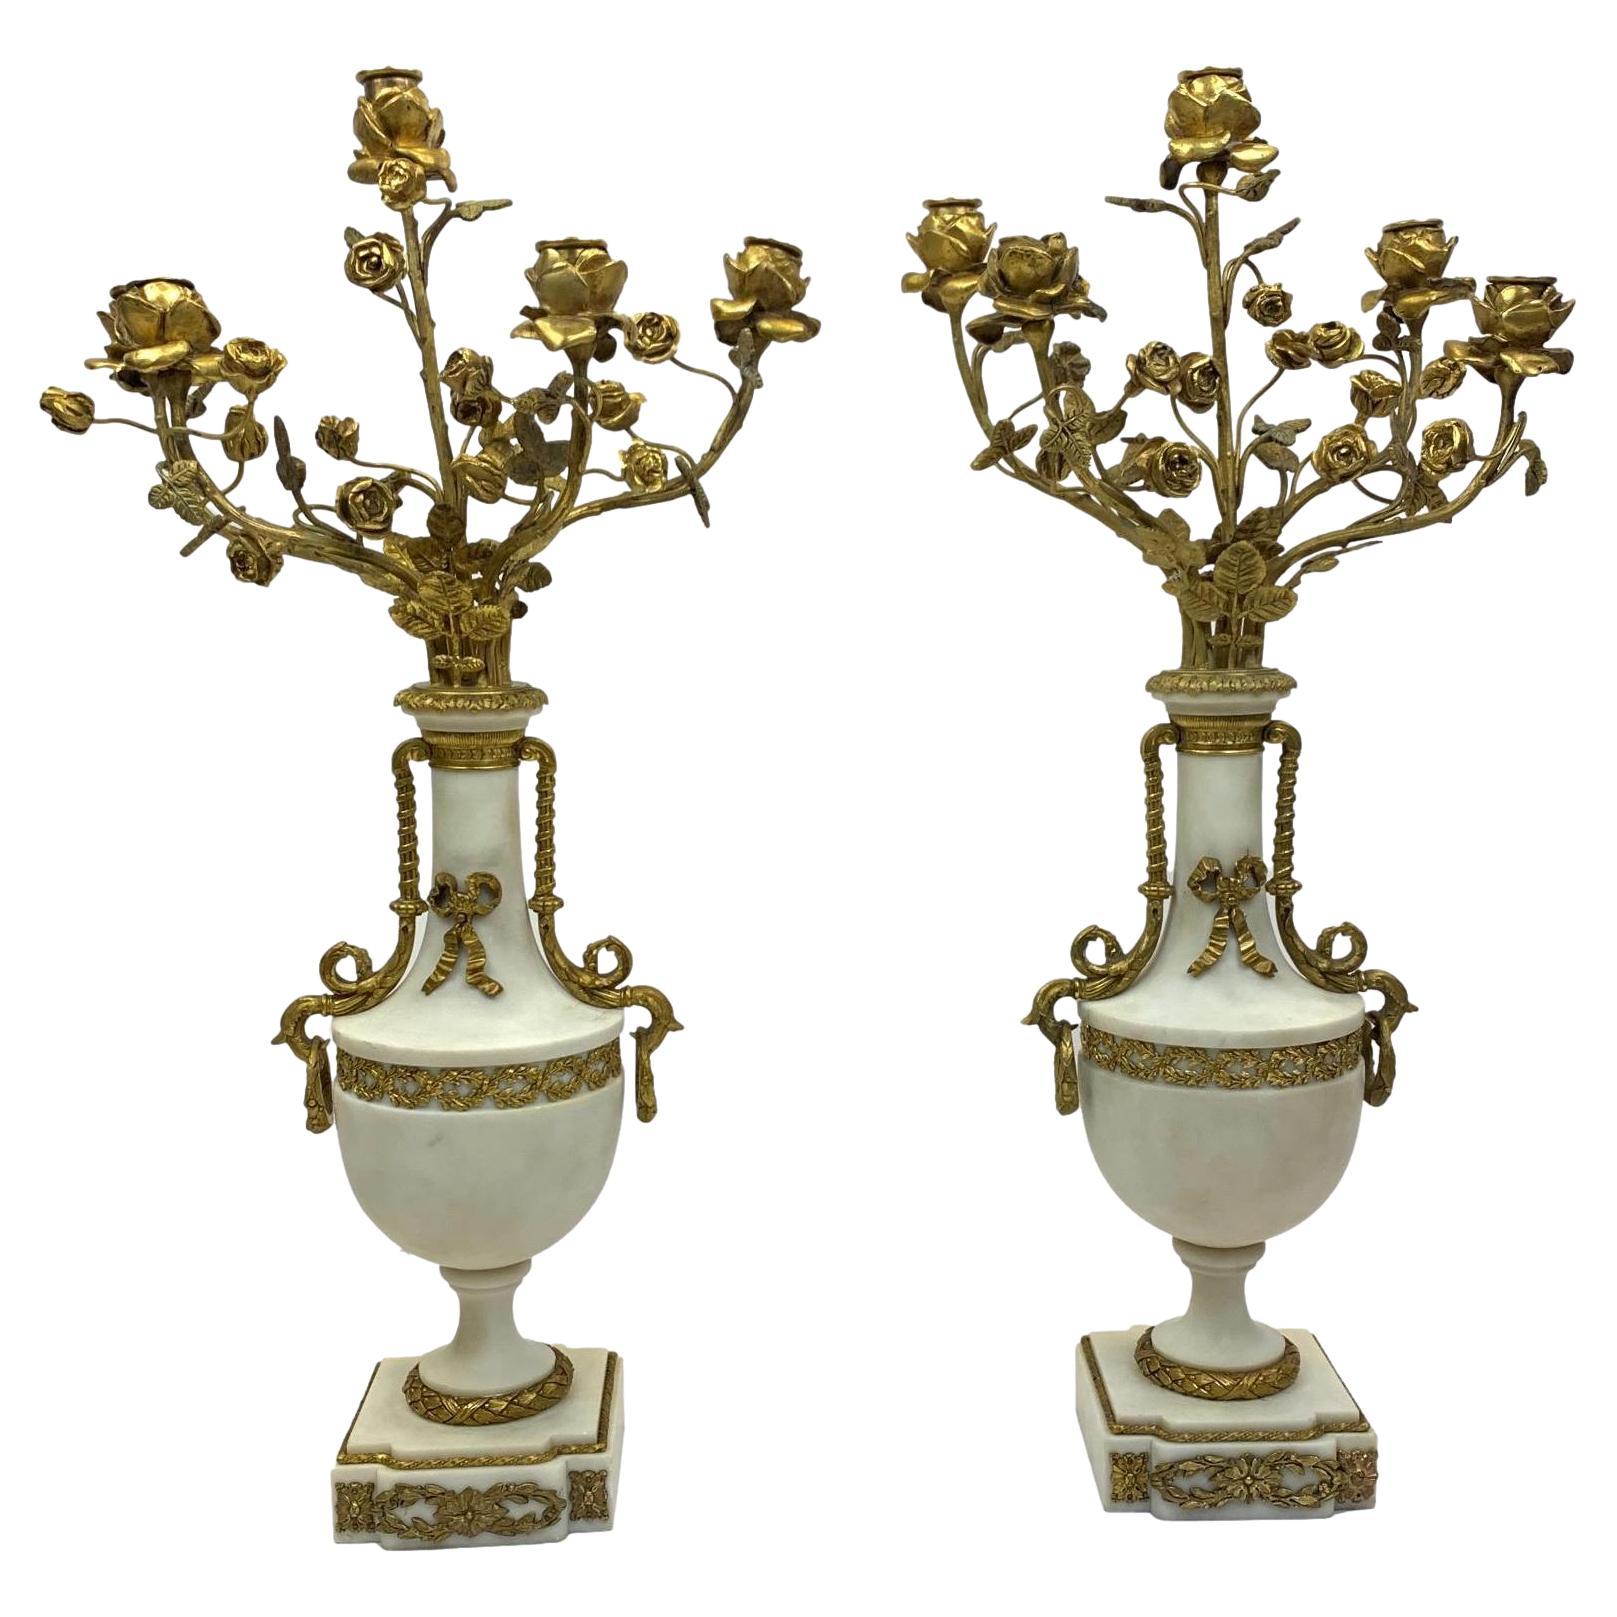 Pair of French Marble and Gilt-Bronze Louis XVI Style Candelabra For Sale